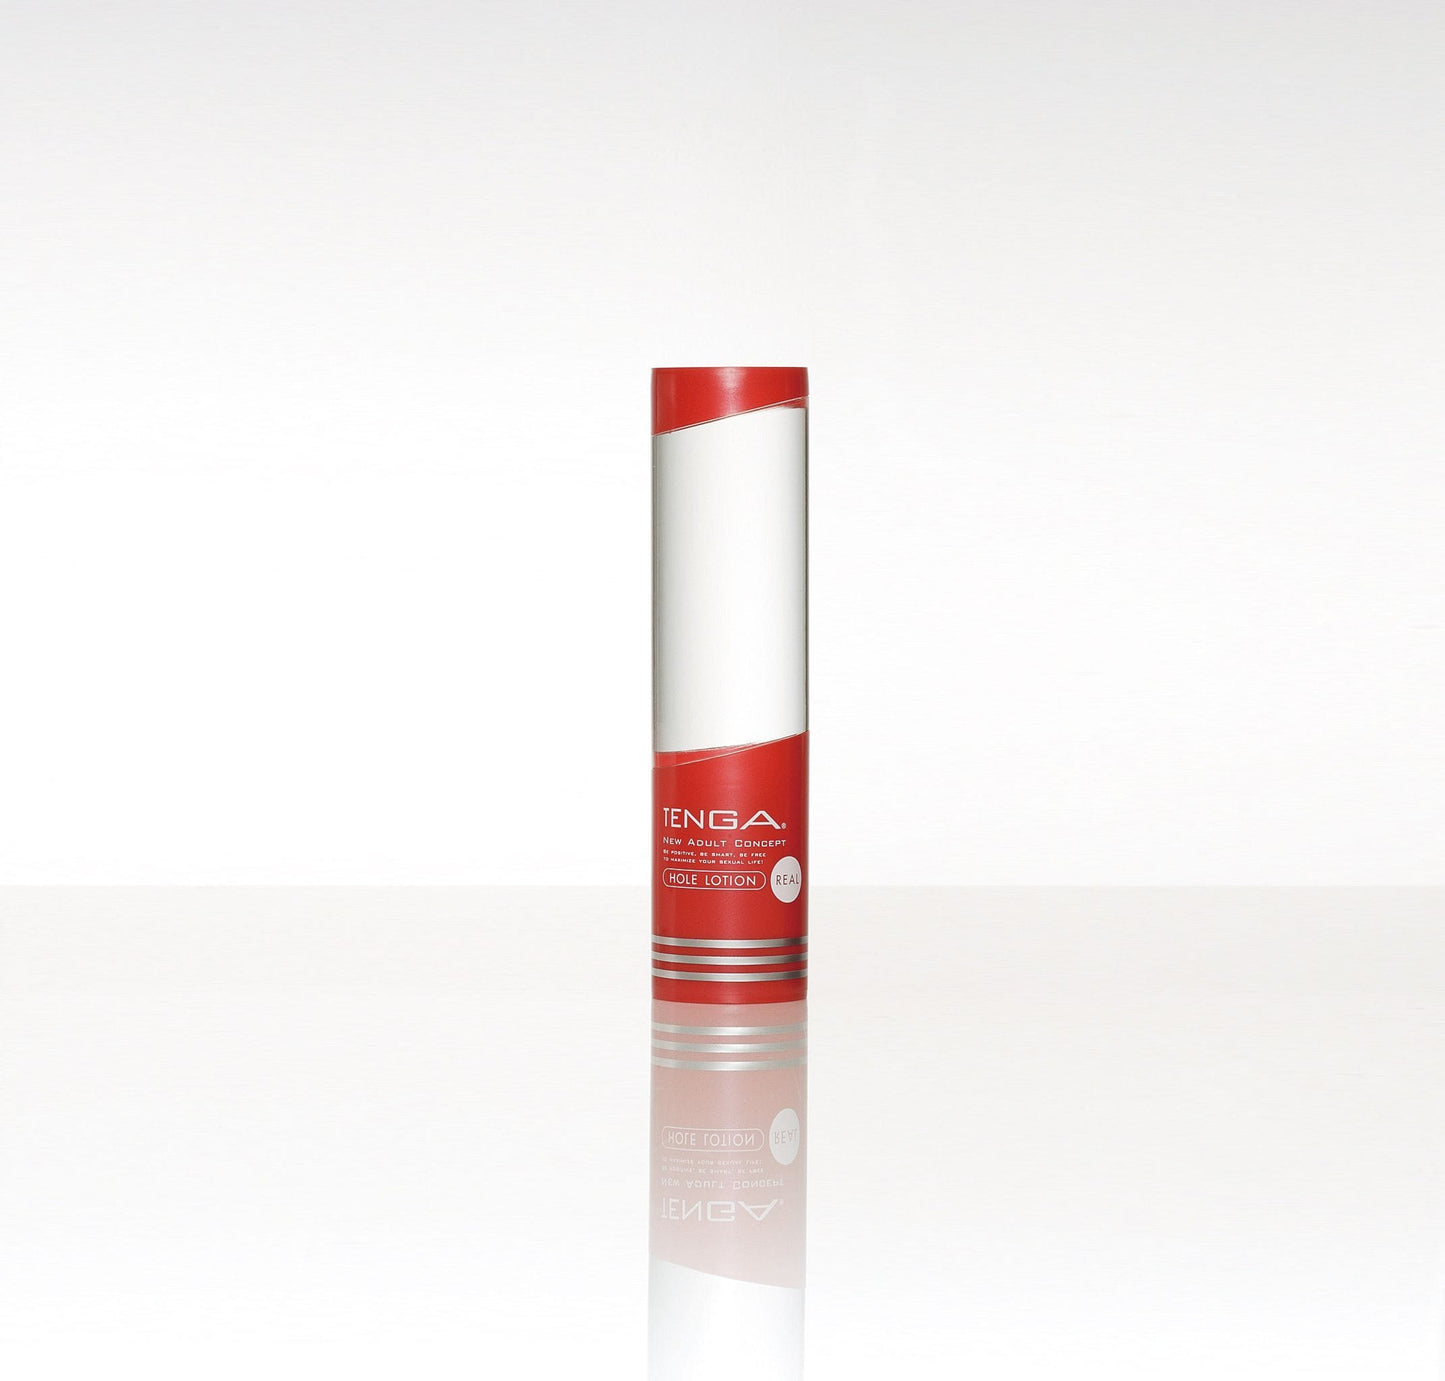 Tenga Hole Lotion Personal Lubricant - Thorn & Feather Sex Toy Canada